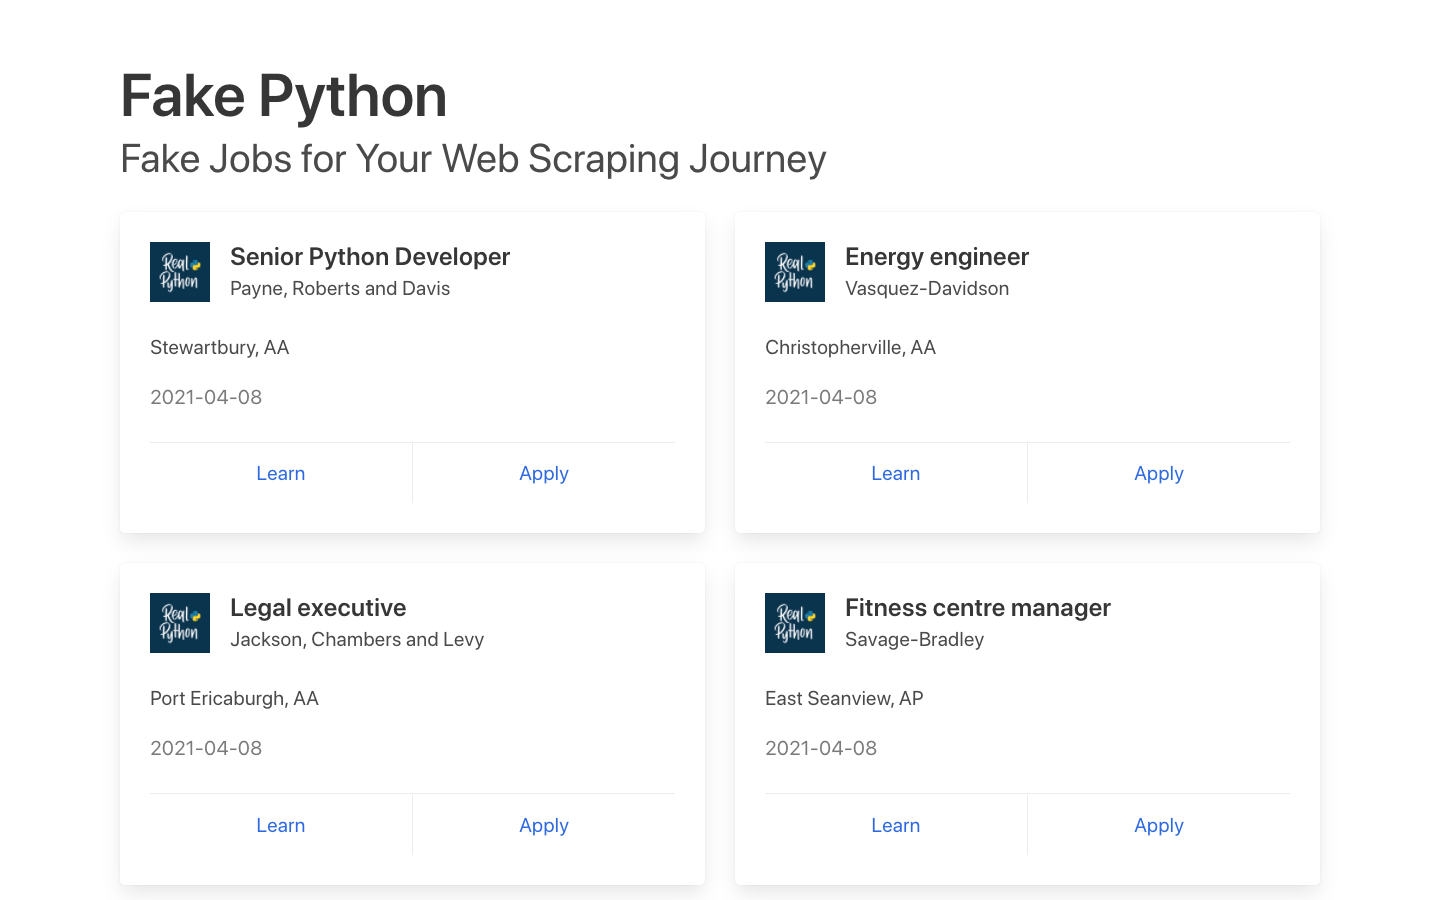 Index page of the Fake Python job board